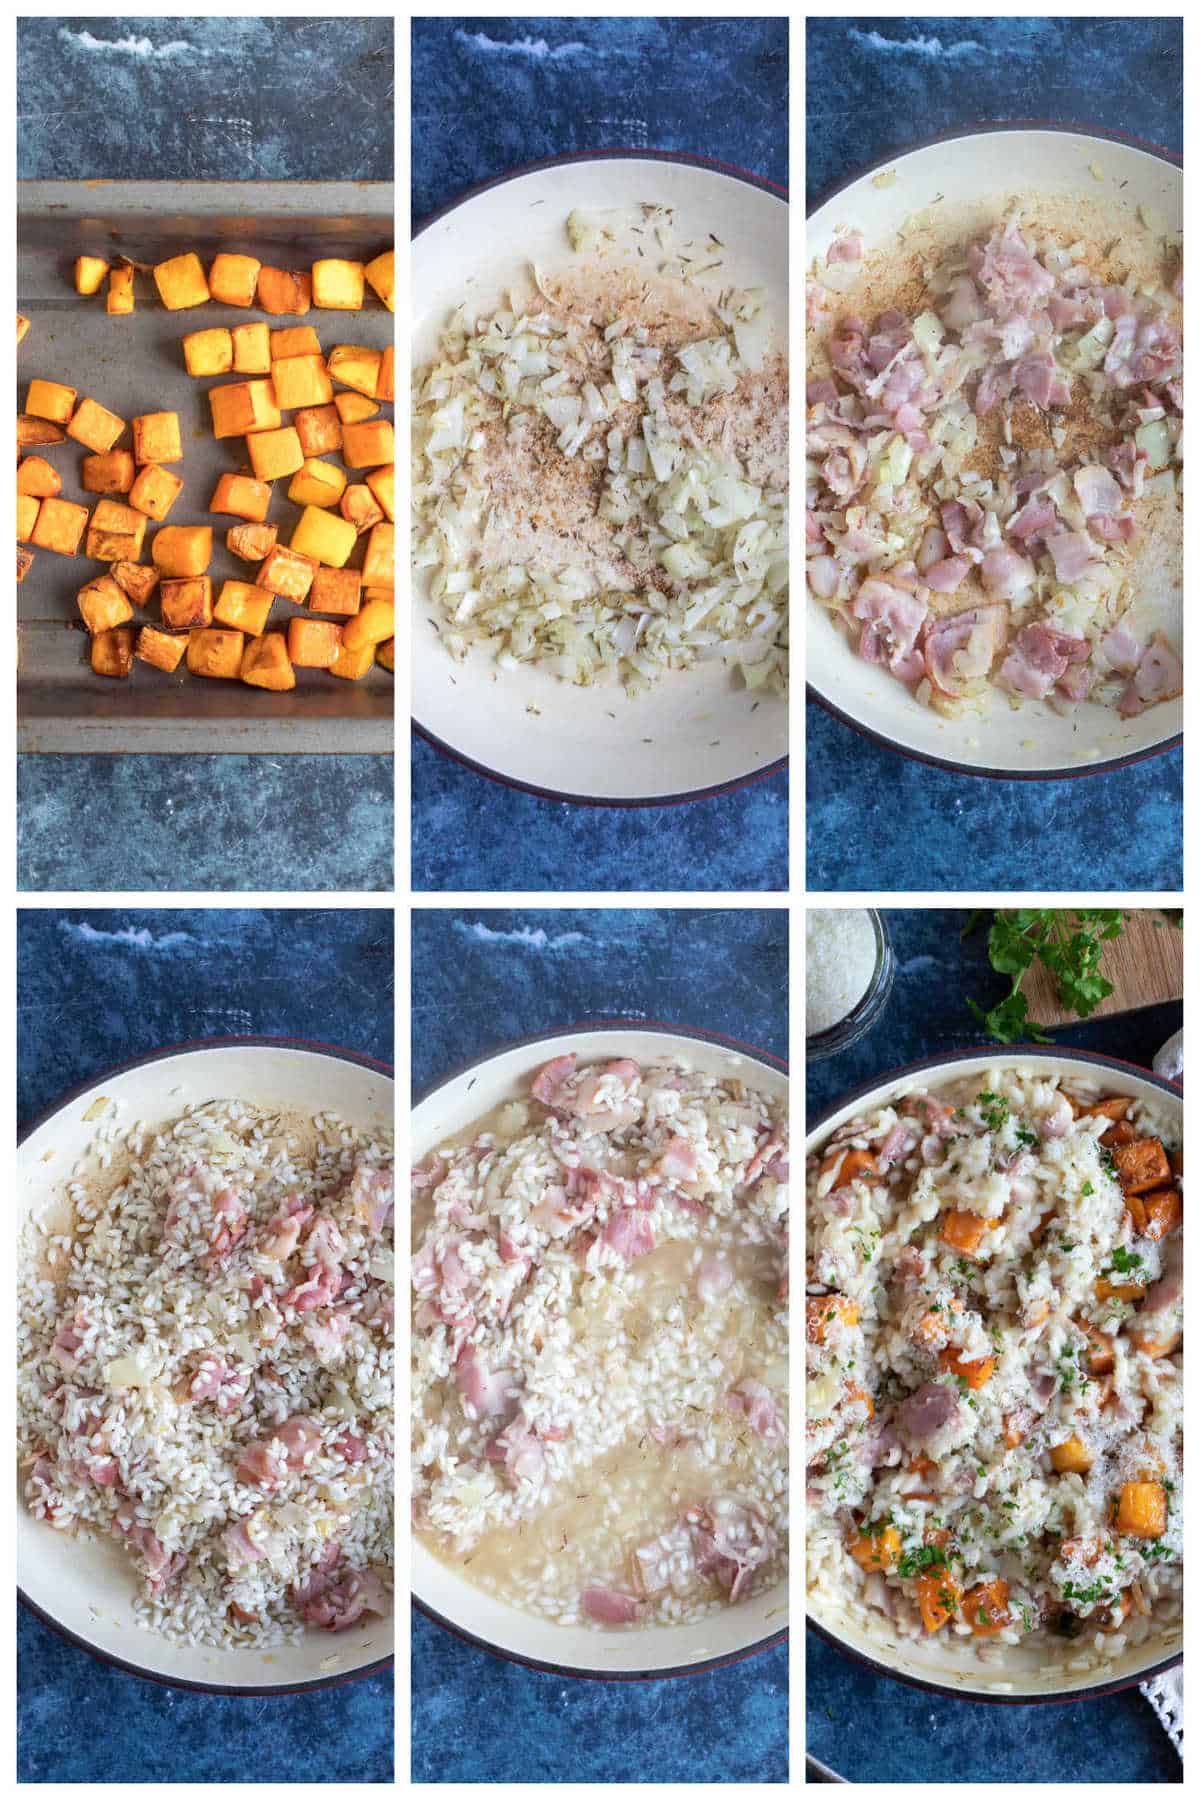 Step by step photo instructions for making bacon and butternut squash risotto.